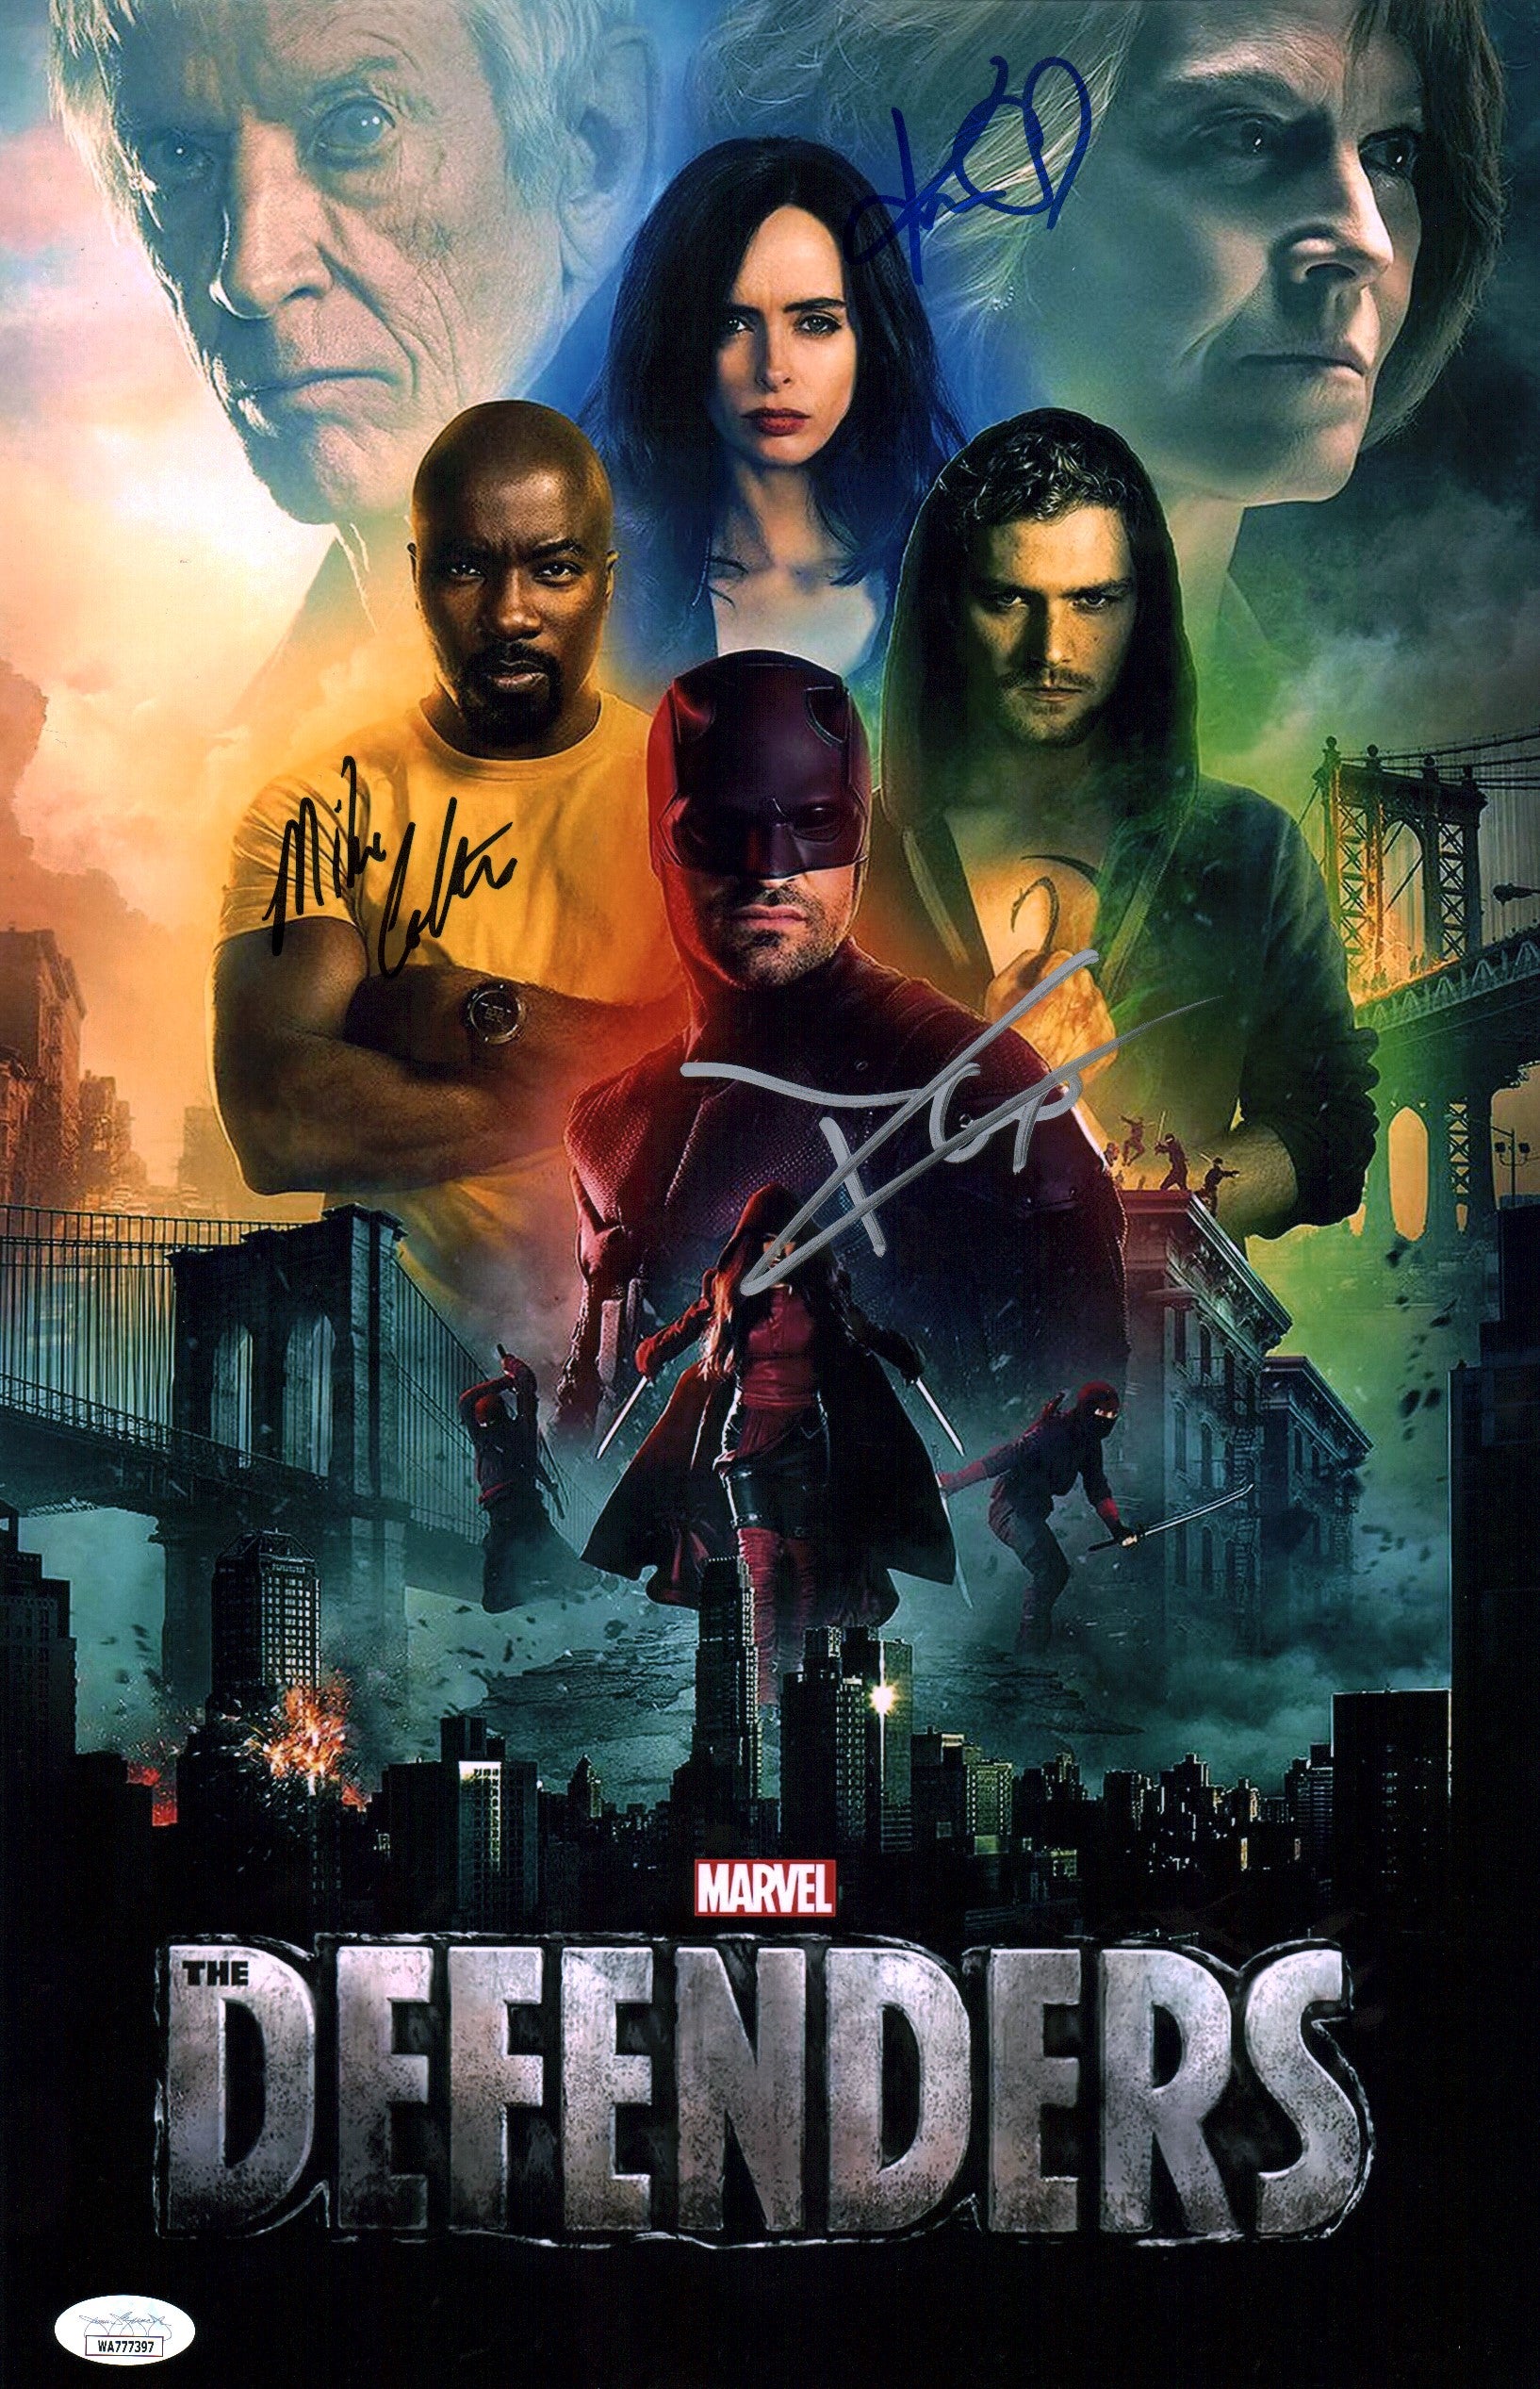 The Defenders Daredevil 11x17 Cast x3 Signed Cox Ritter Colter Photo Poster JSA COA Certified Autograph